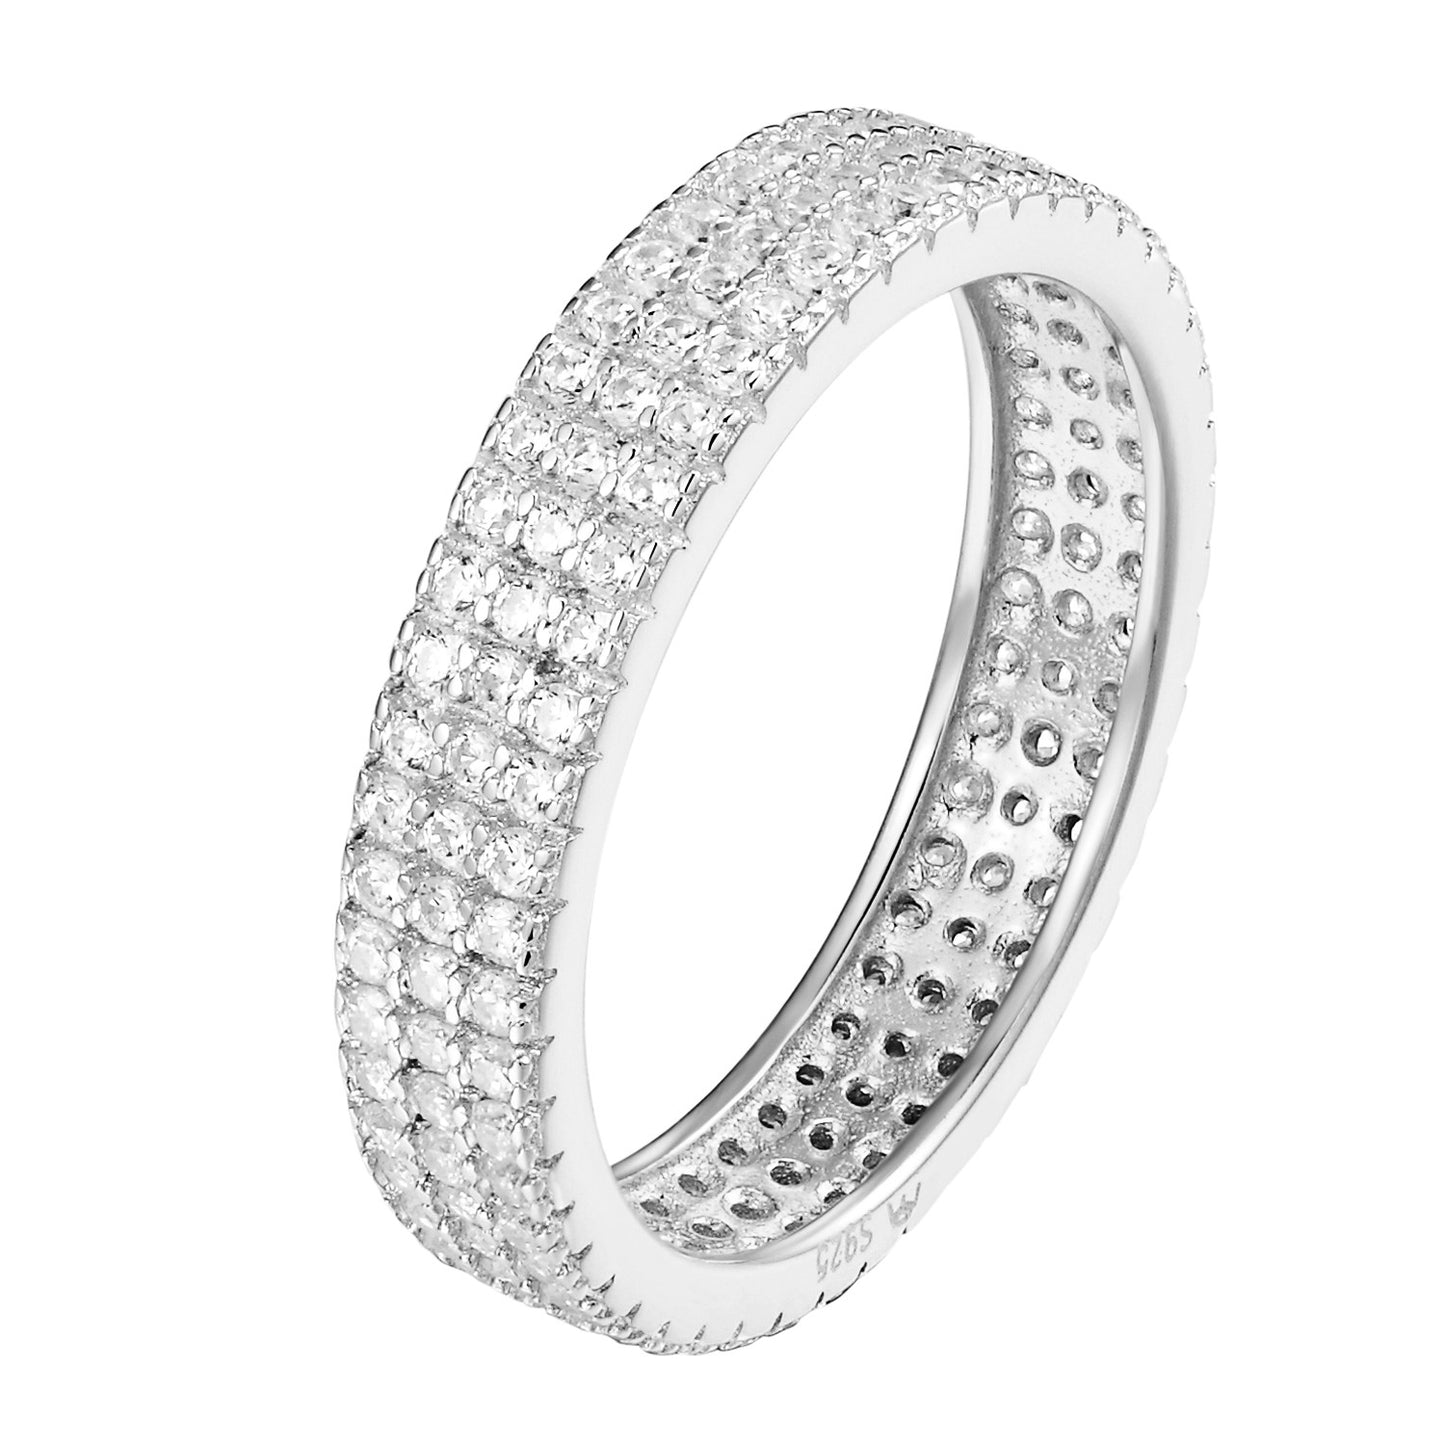 Sterling Silver Eternity Ring 3 Row Cubic Zirconia Round Cut Wedding Band Ladies